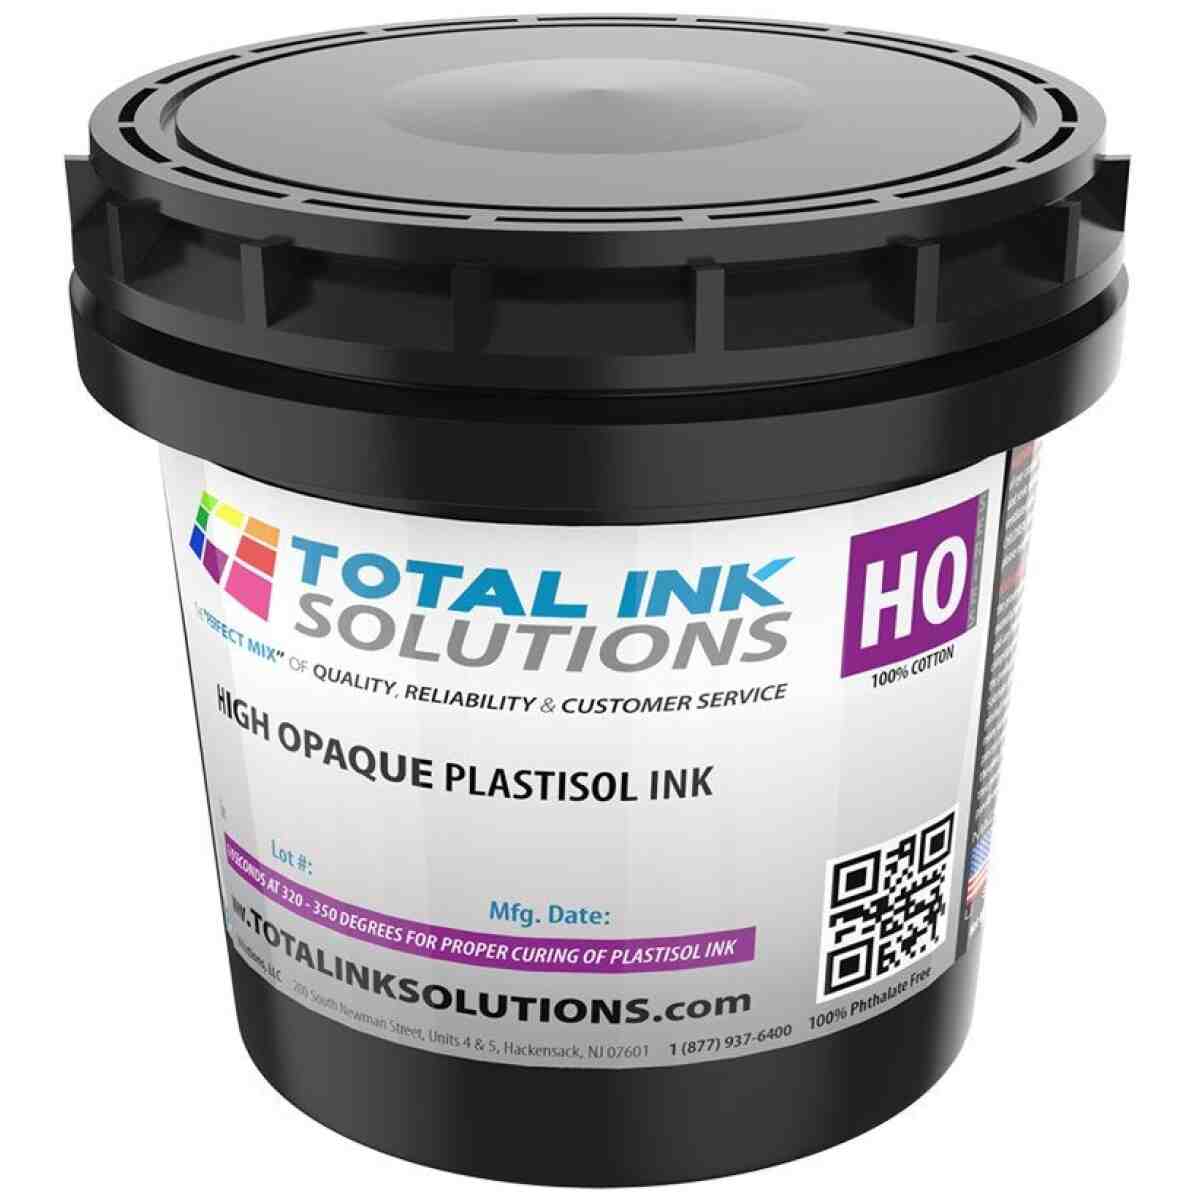 High Opaque Plastisol Ink - Pint TOTAL INK SOLUTIONS®